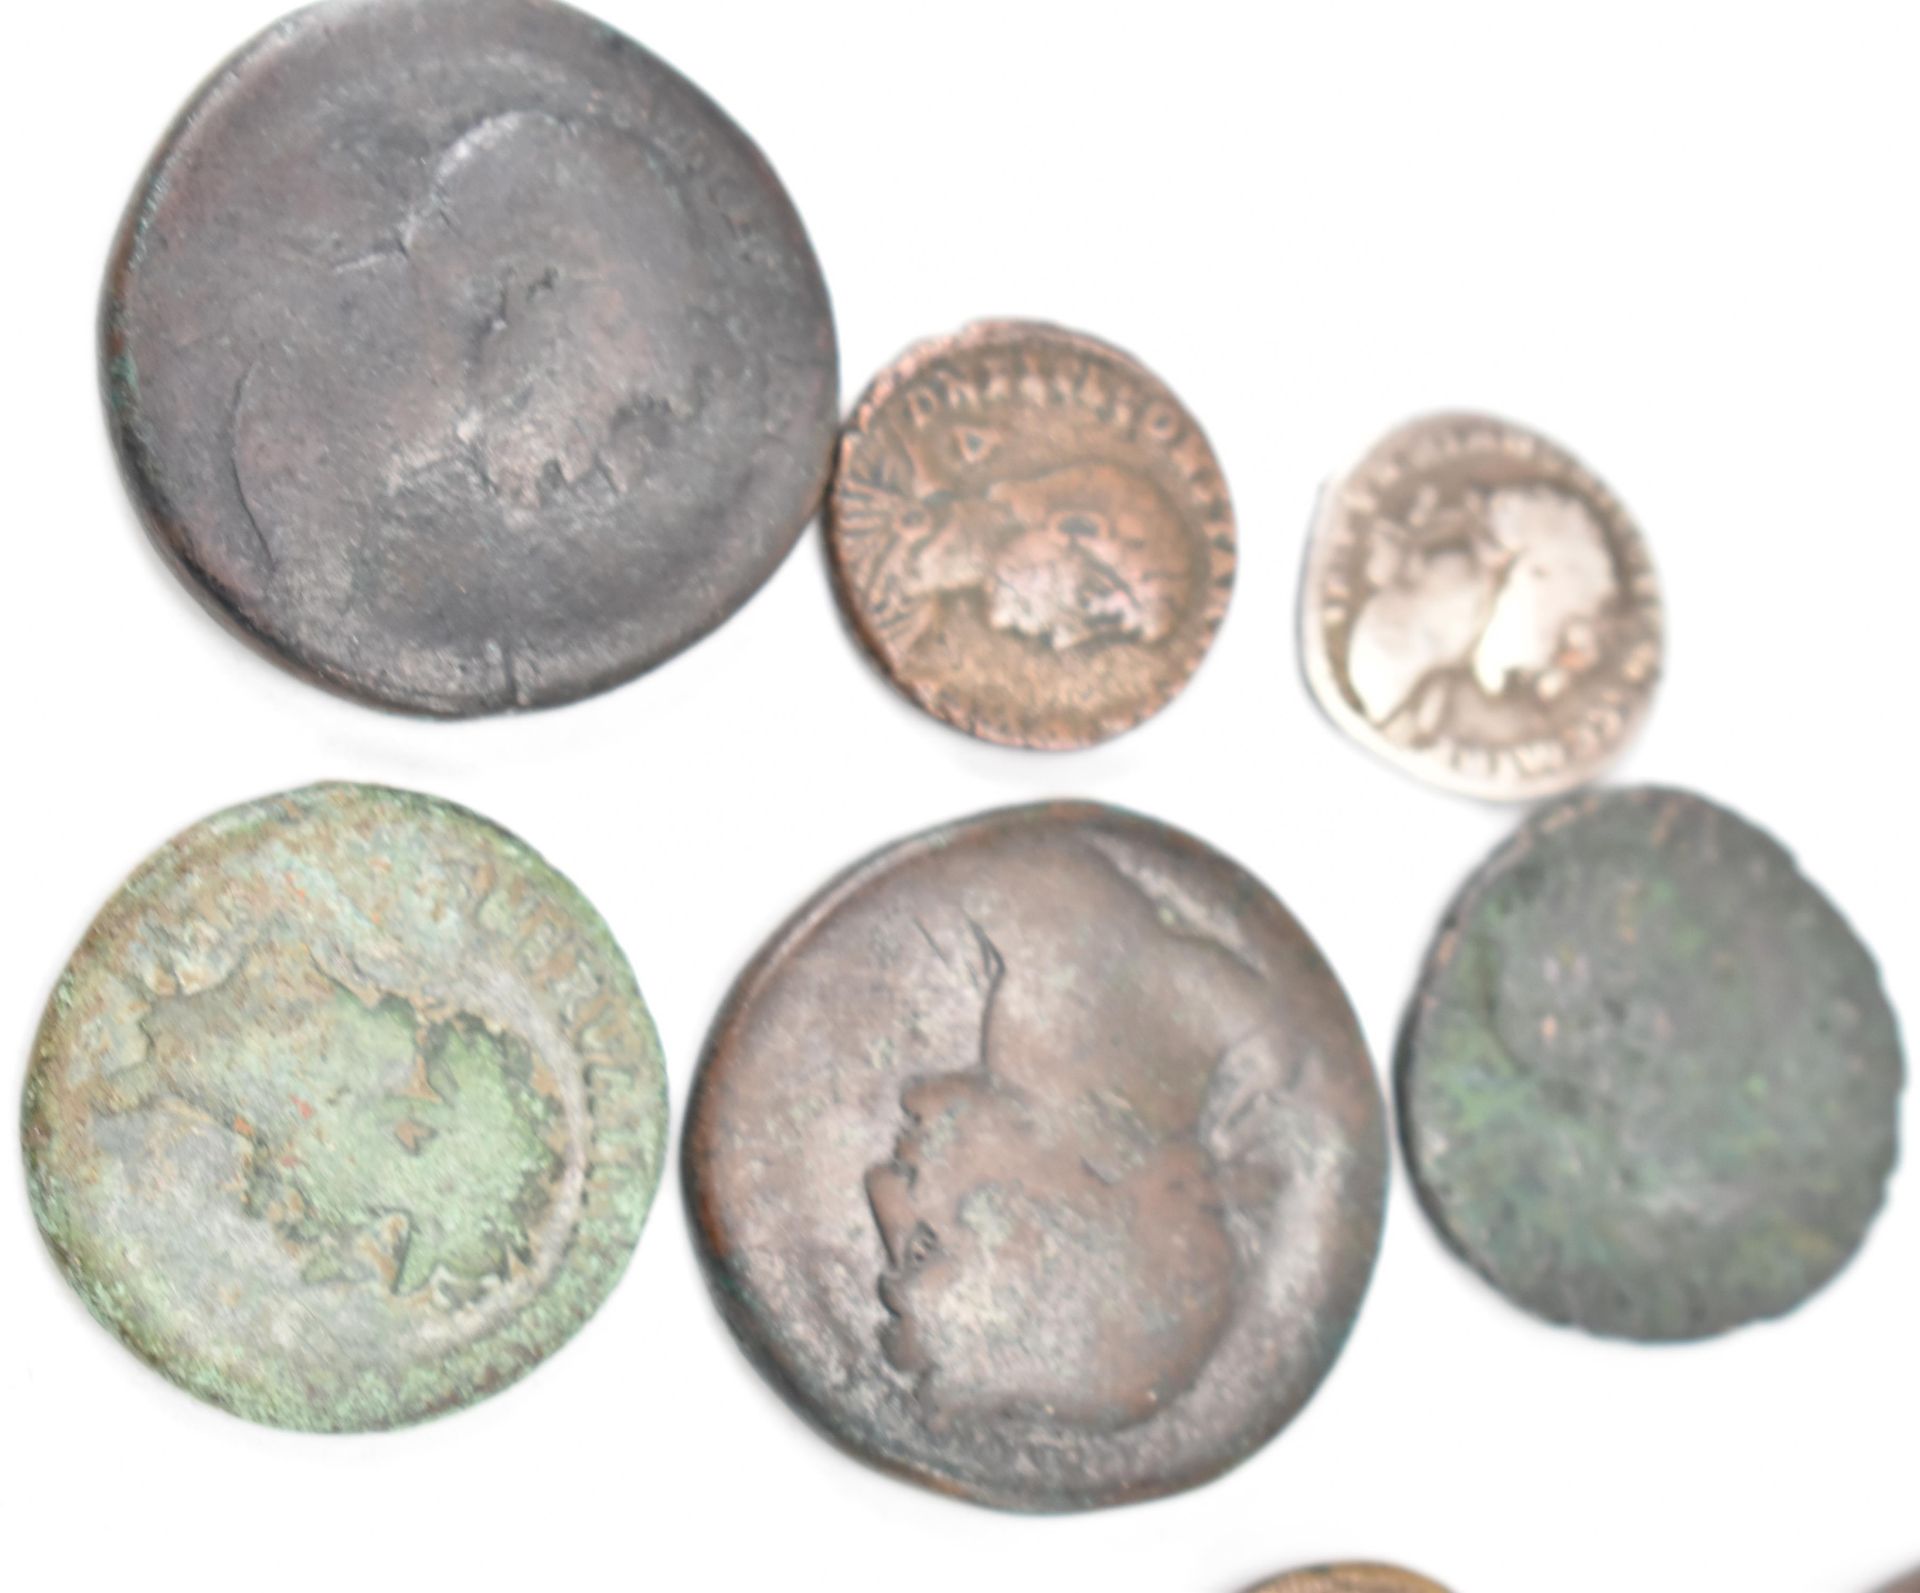 NINE ANCIENT ROMAN IMPERIAL COINS FROM THE REIGN OF TRAJAN - Image 4 of 4